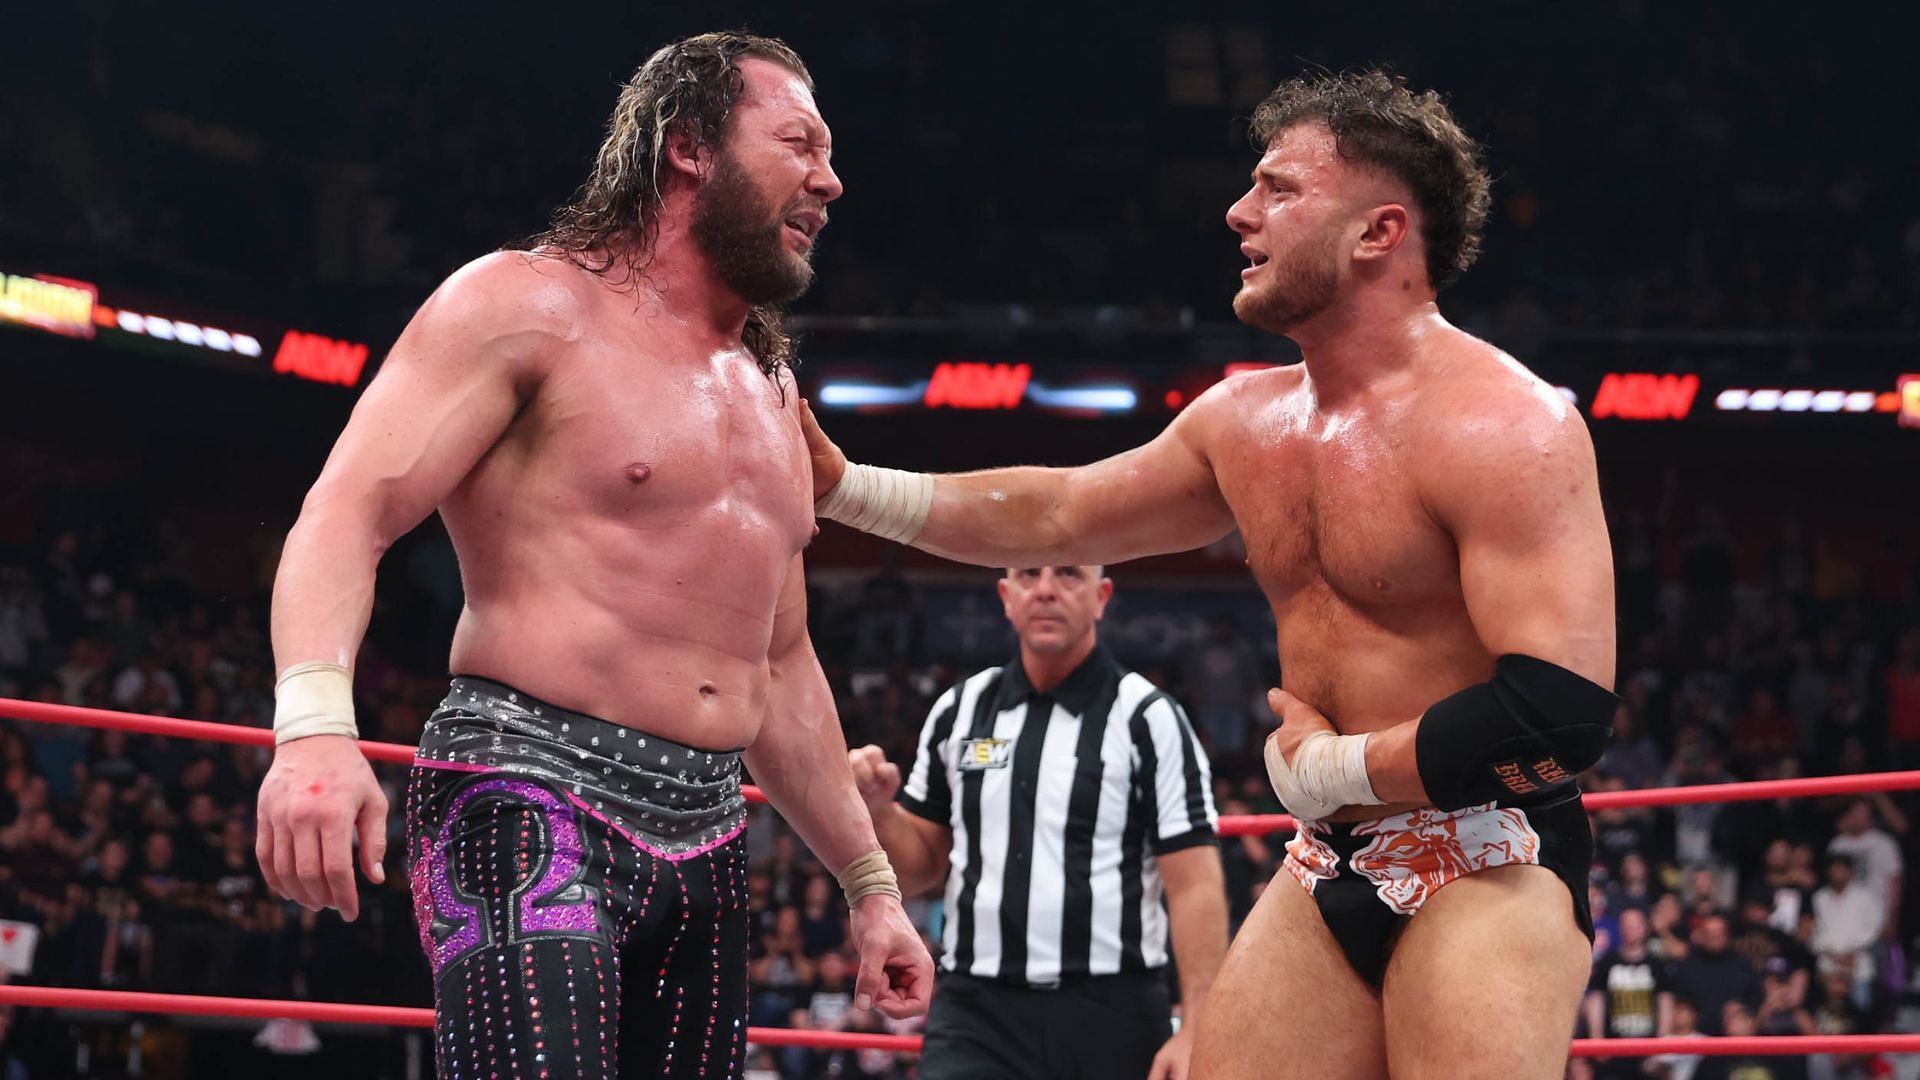 MJF has opened up about his match with Kenny Omega